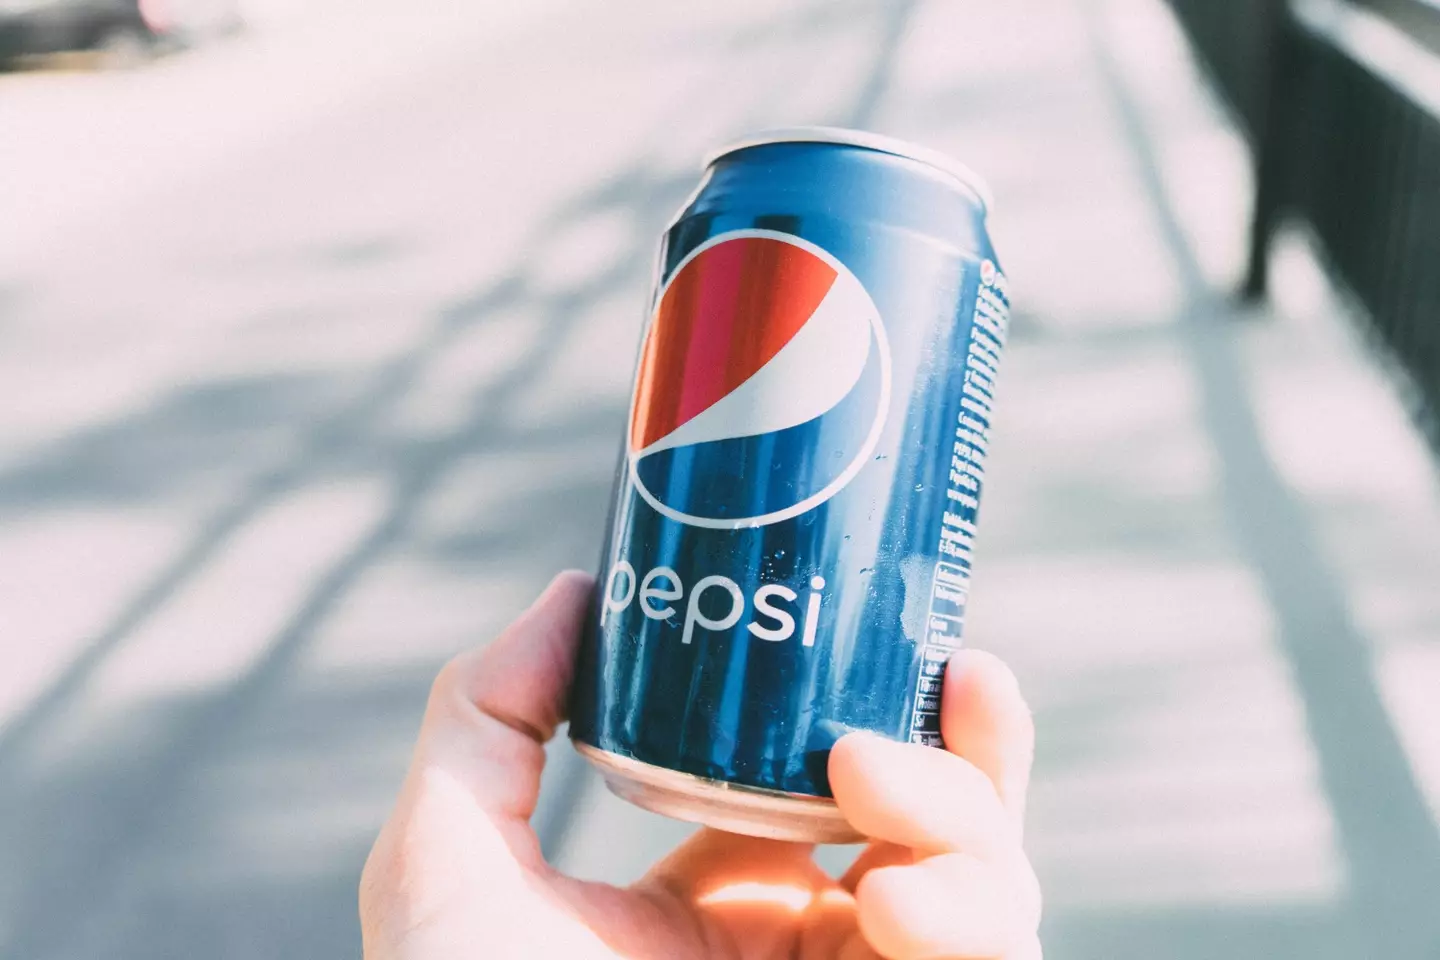 Original Pepsi is a favourite for many.